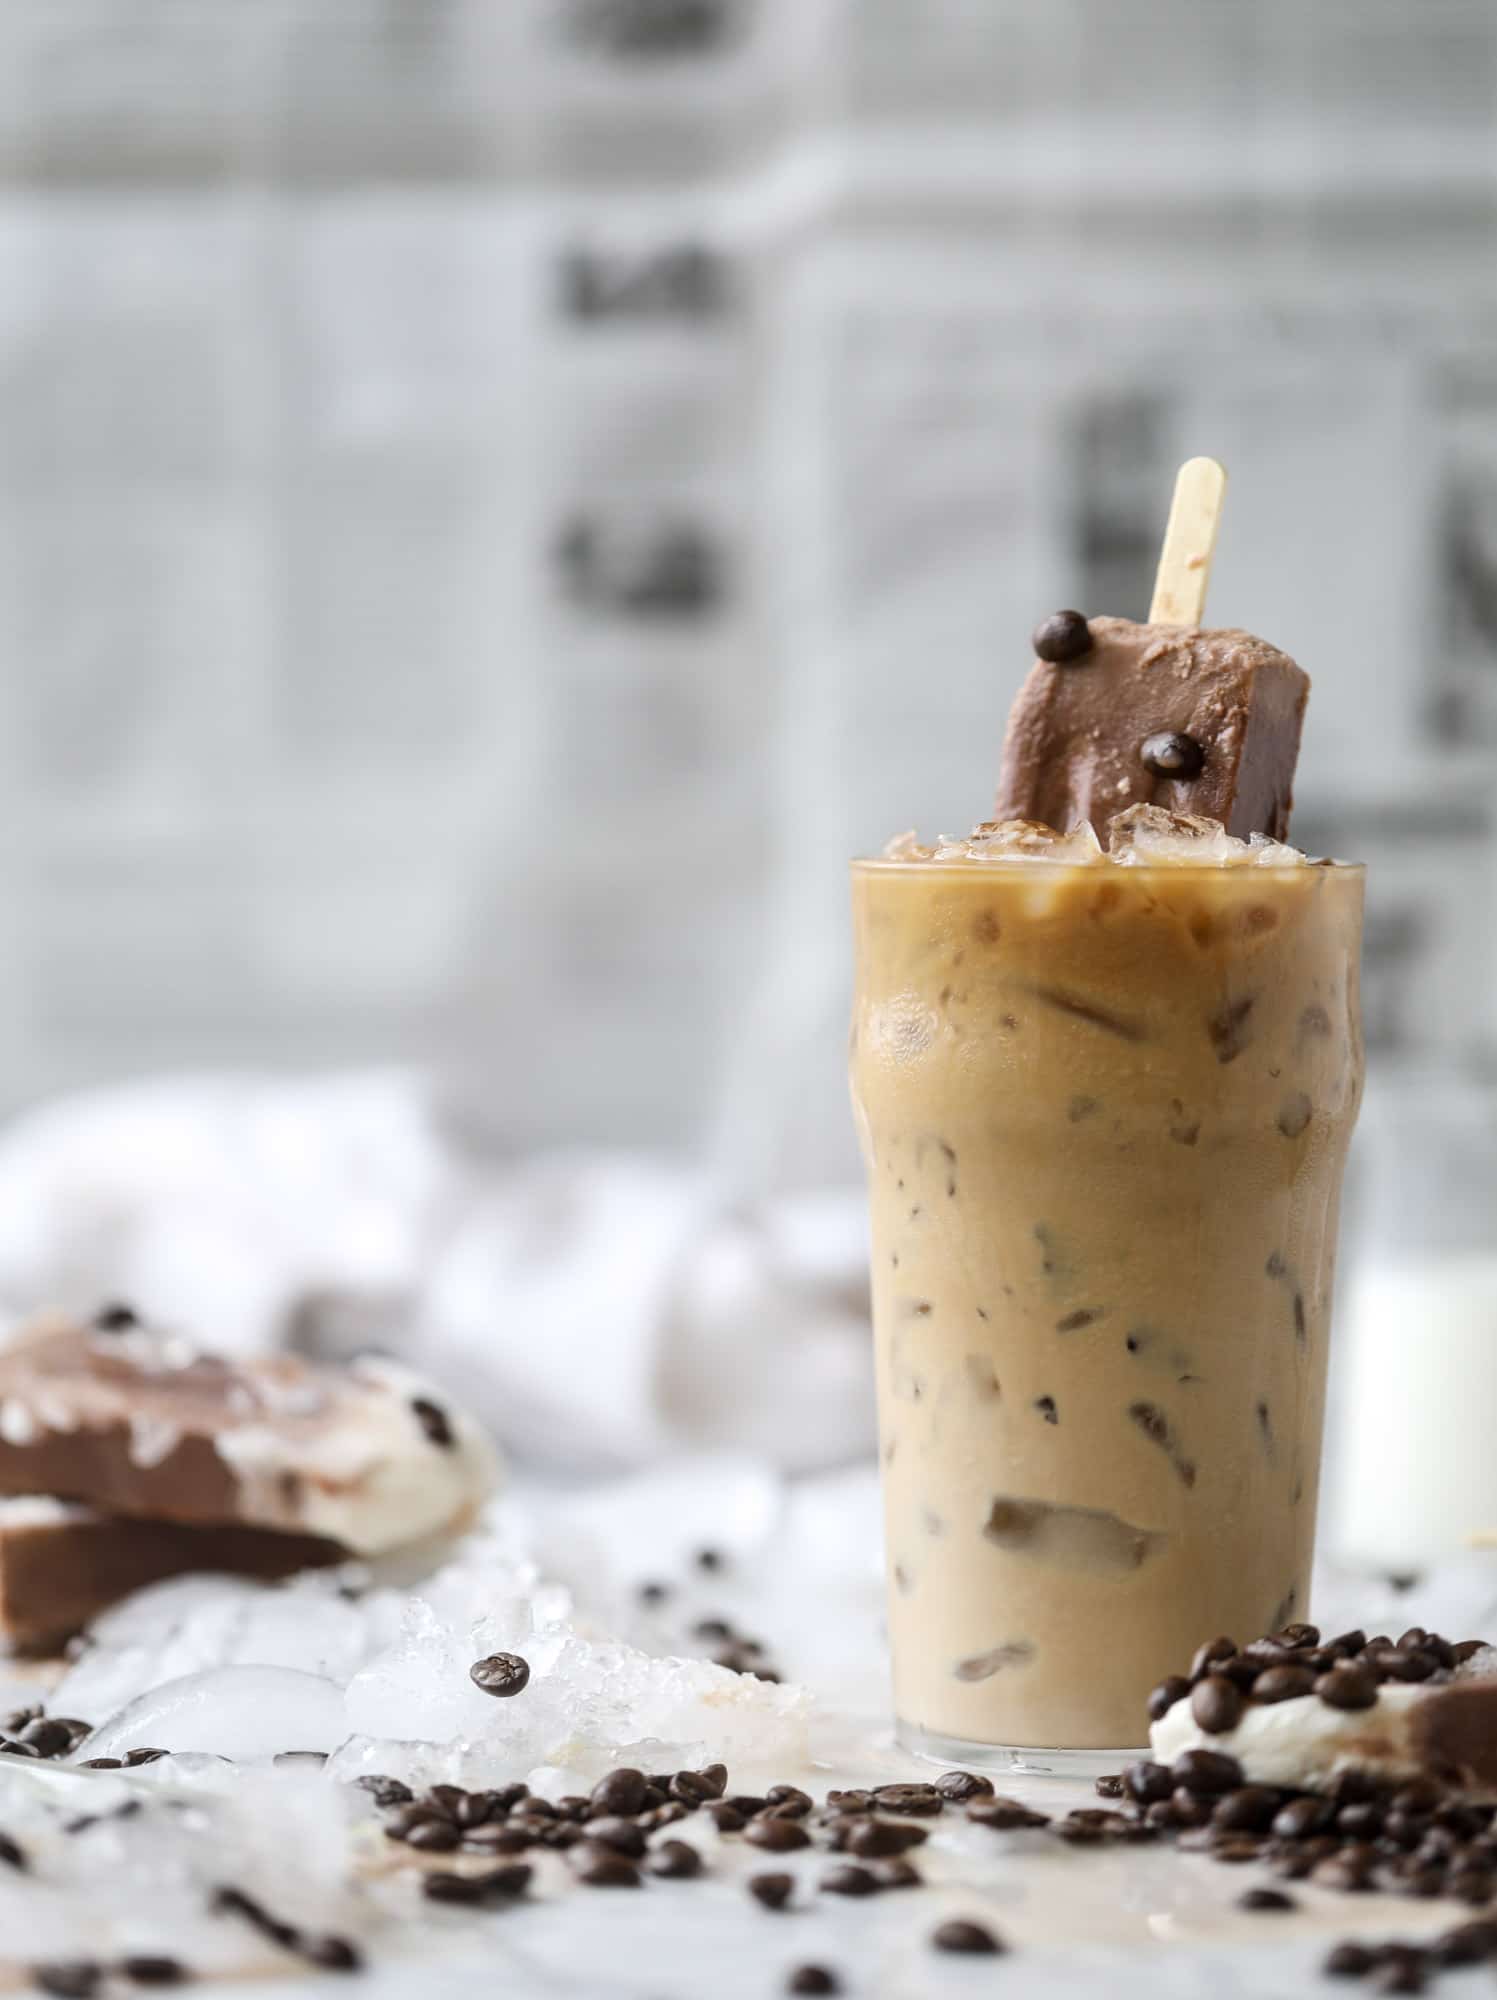 These fudgesicles are made with cold brew and dutch process cocoa for the most fun grown-up popsicle that can also deliver a little caffeine jolt. Topped with vanilla bean sweet cream, these are just like an iced latte in a pop! Serve as a treat or a snack! I howsweeteats.com #coldbrew #coffee #sweet #cream #popsicle #fudgesicle